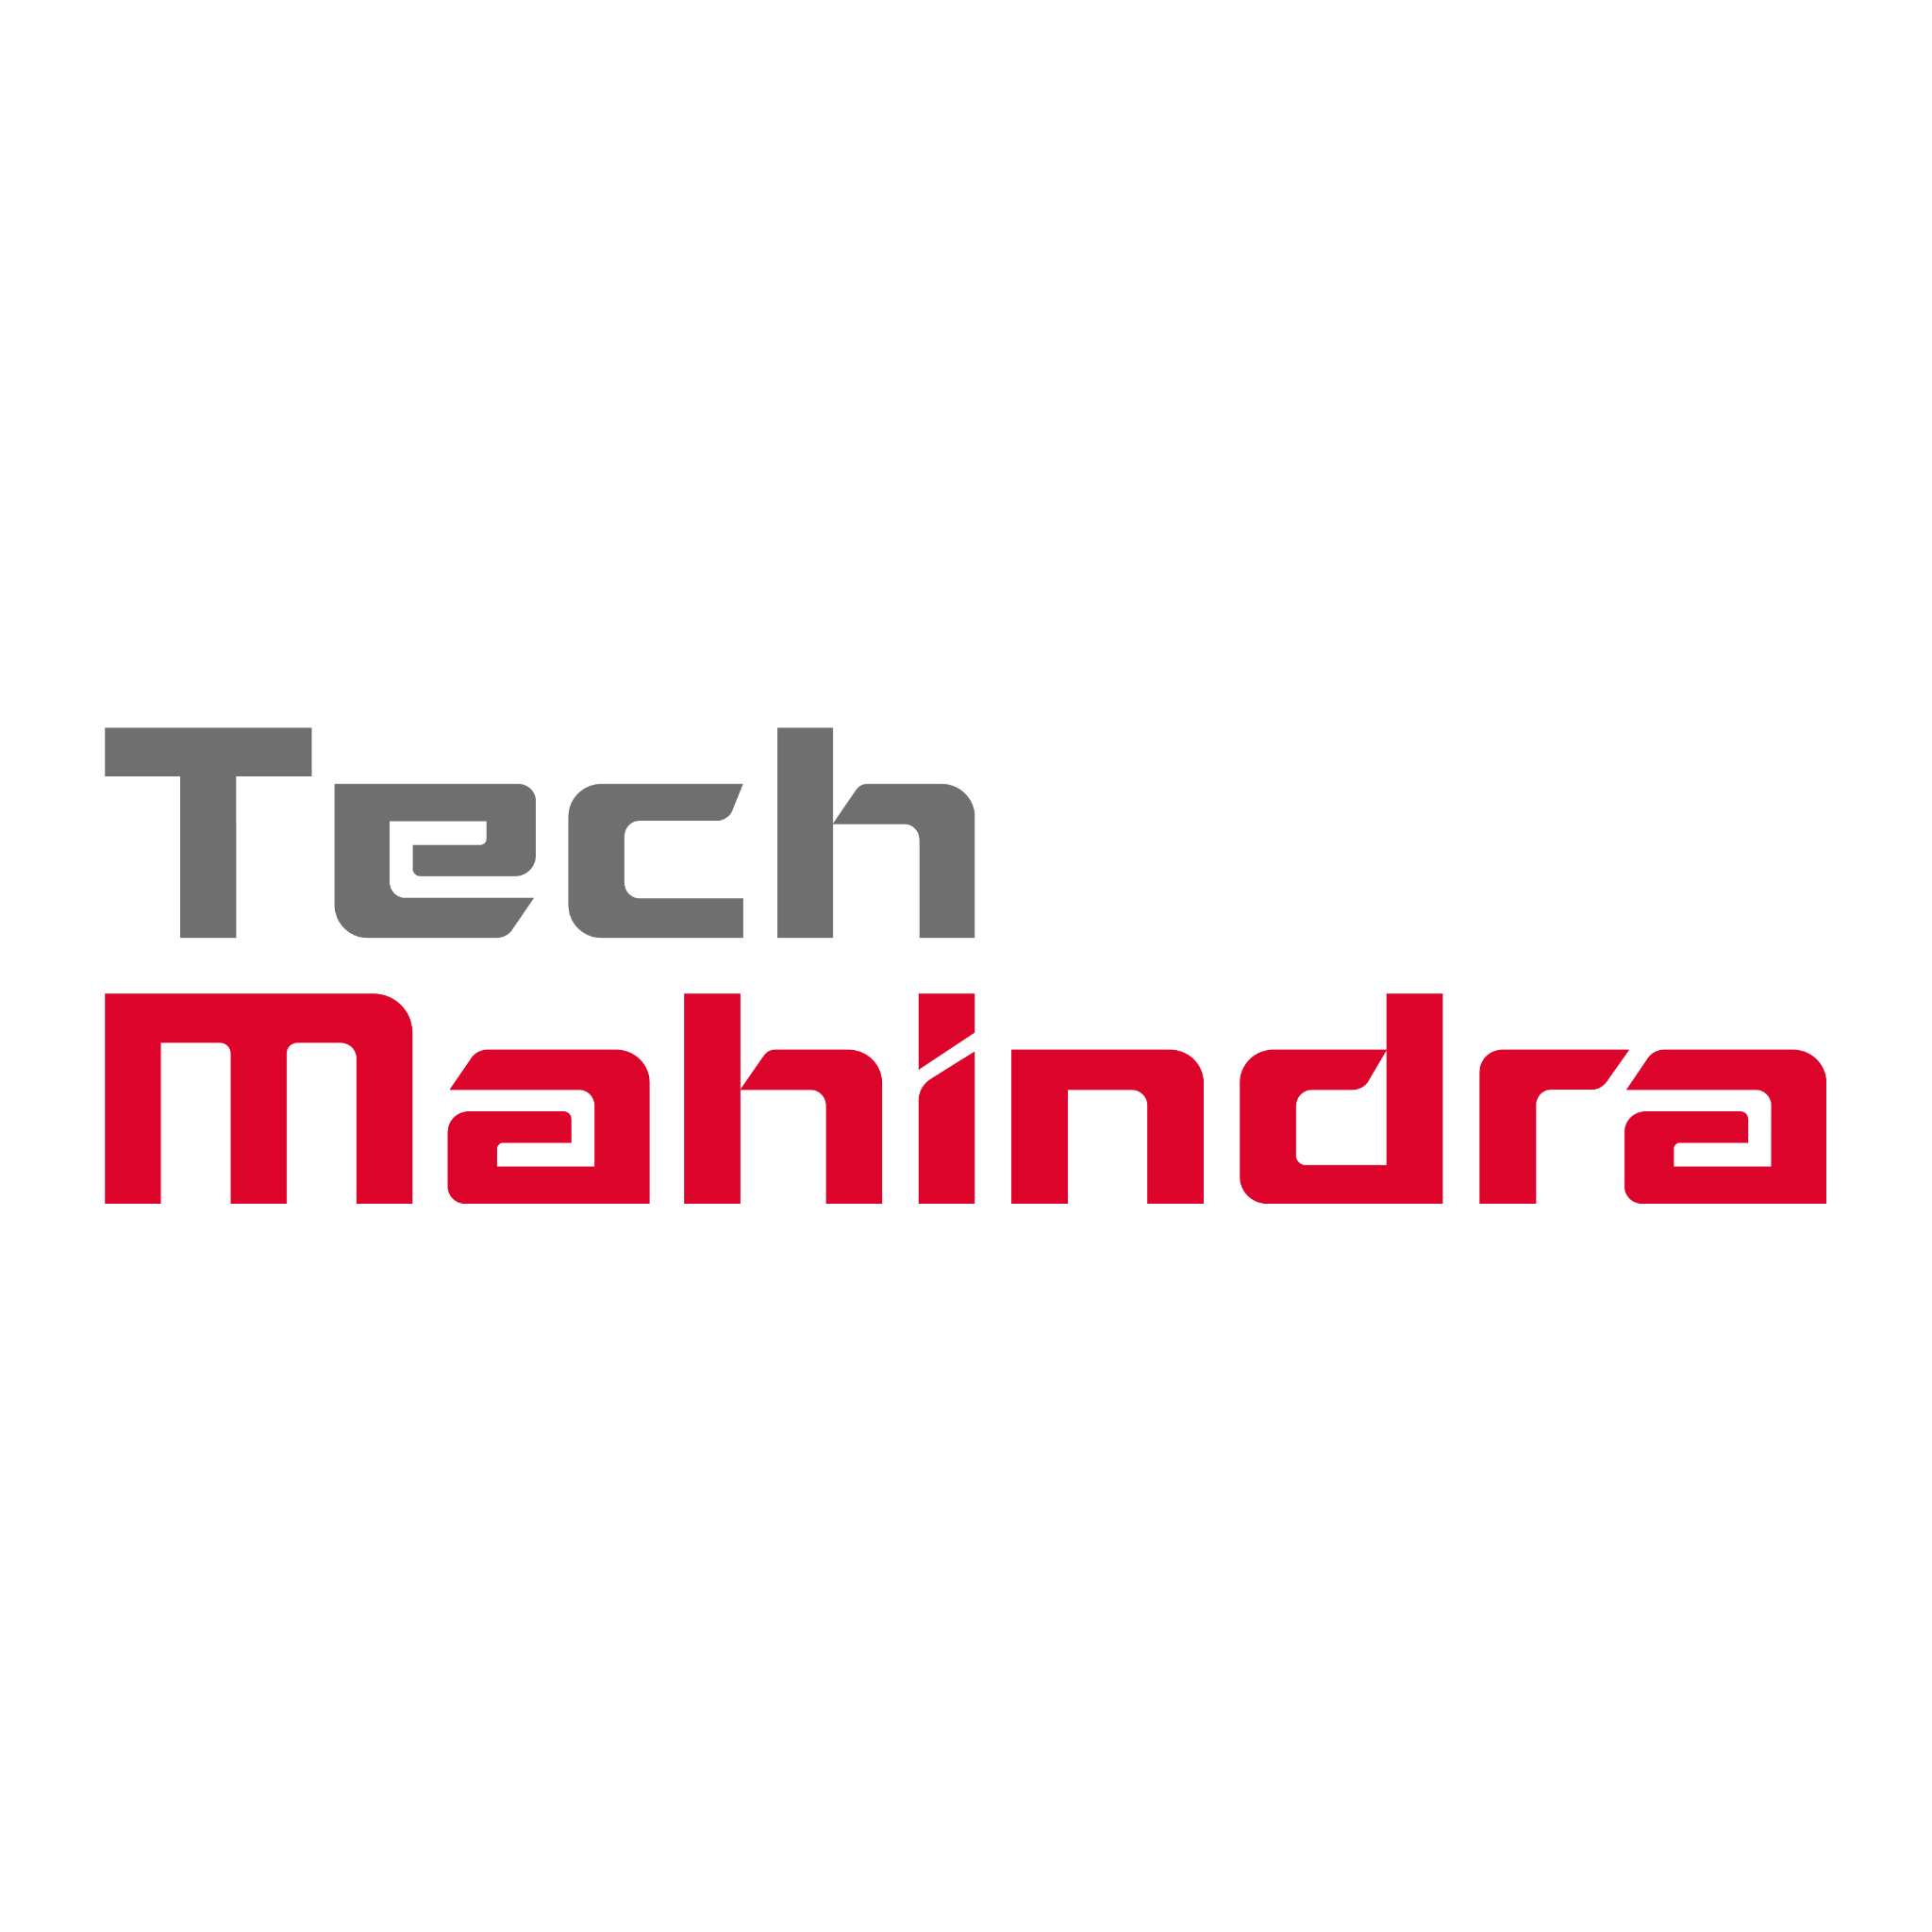 Tech Mahindra Launches “Synergy Lounge” with IBM and Red Hat to Accelerate Digital Transformation for Enterprises-thumnail